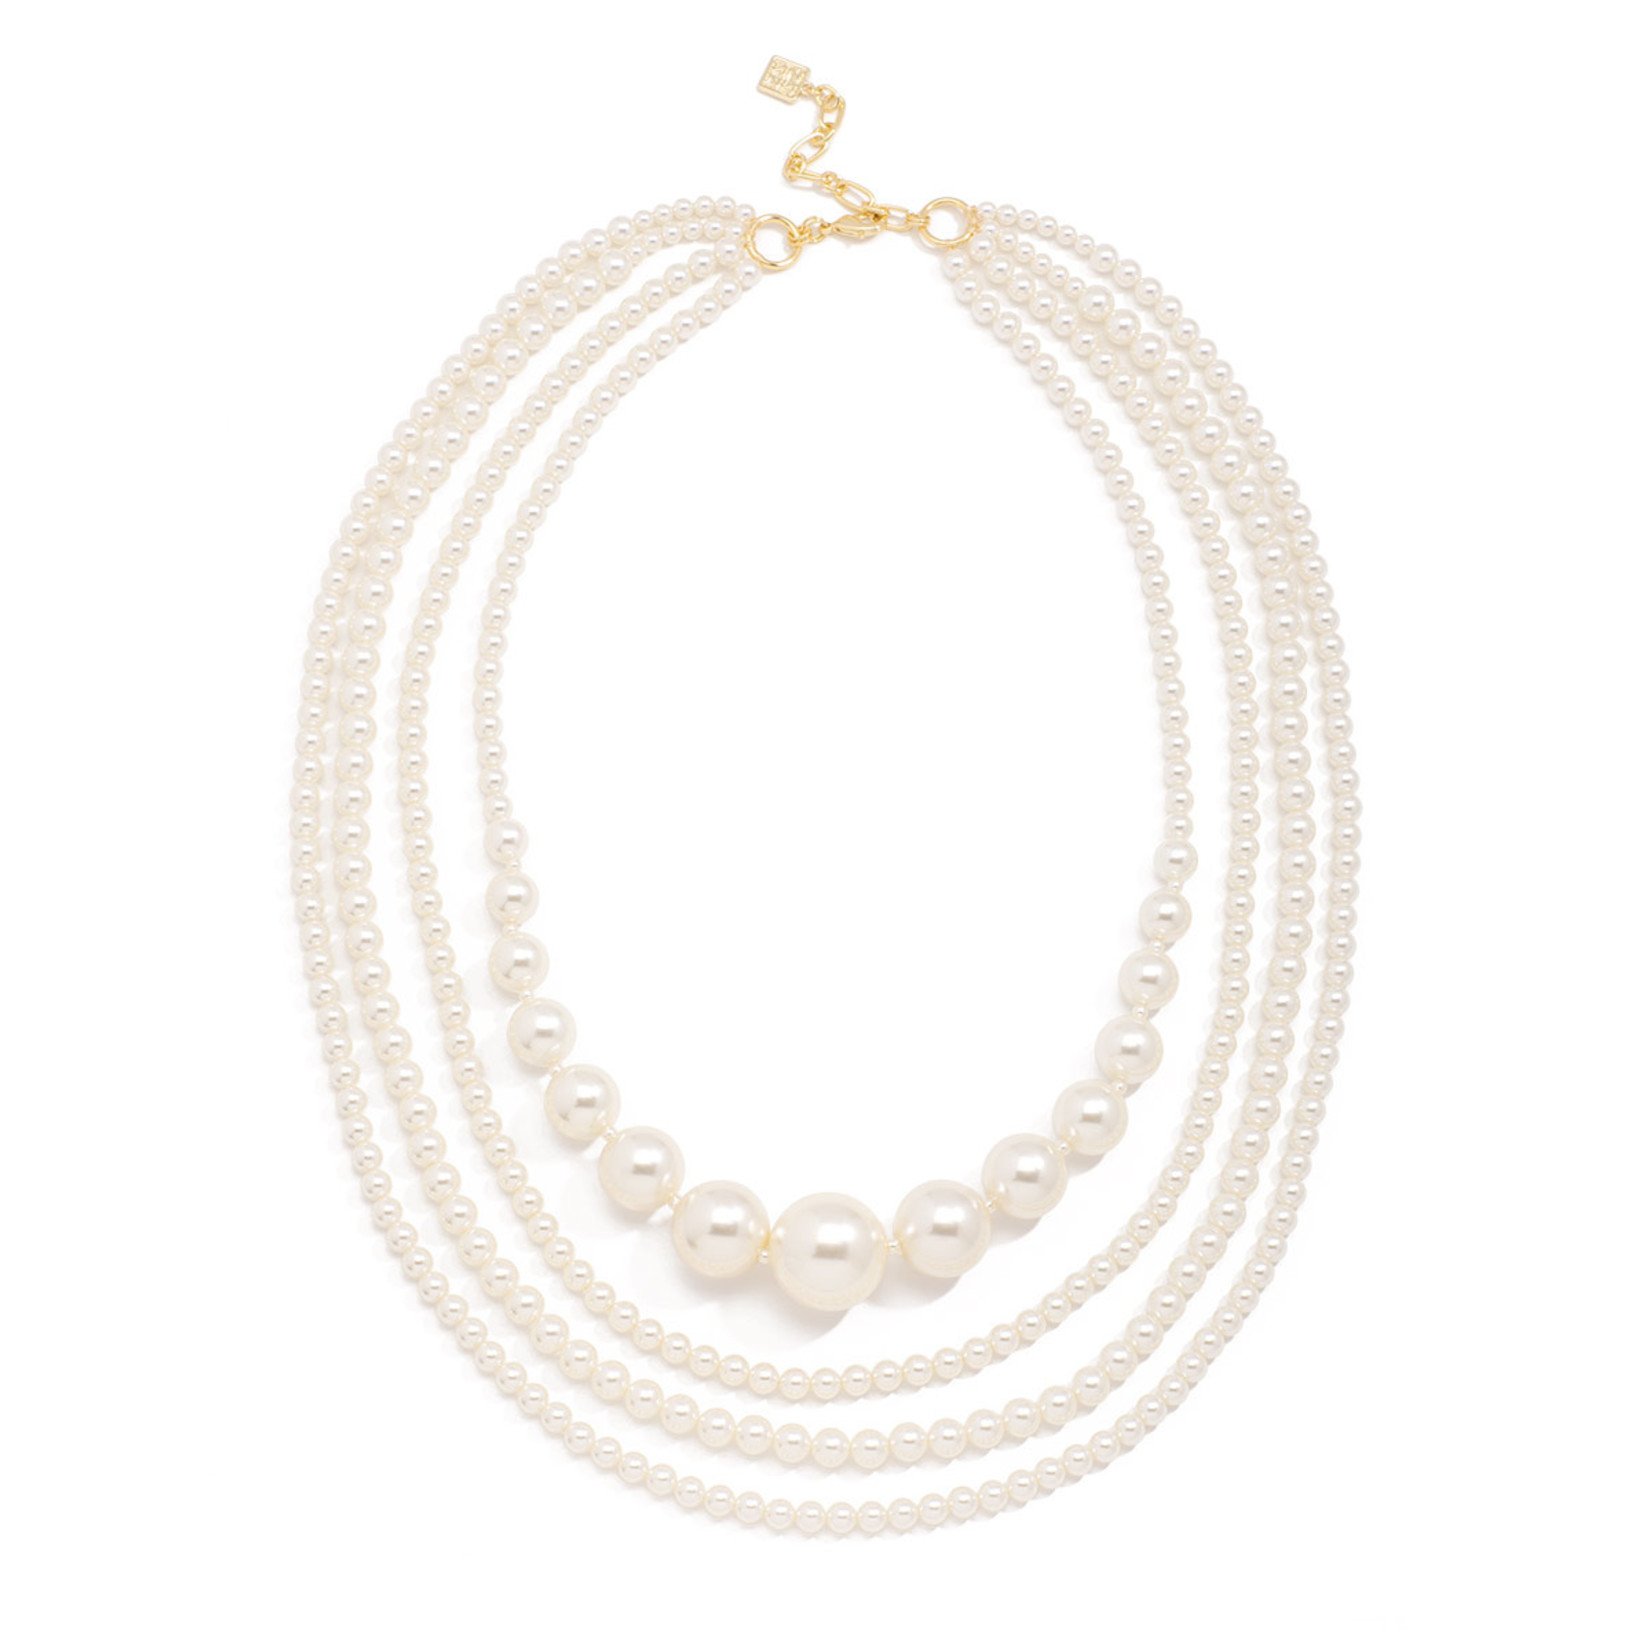 Zenzii Contrasting Pearl Beaded Multi-Strand Long Necklace